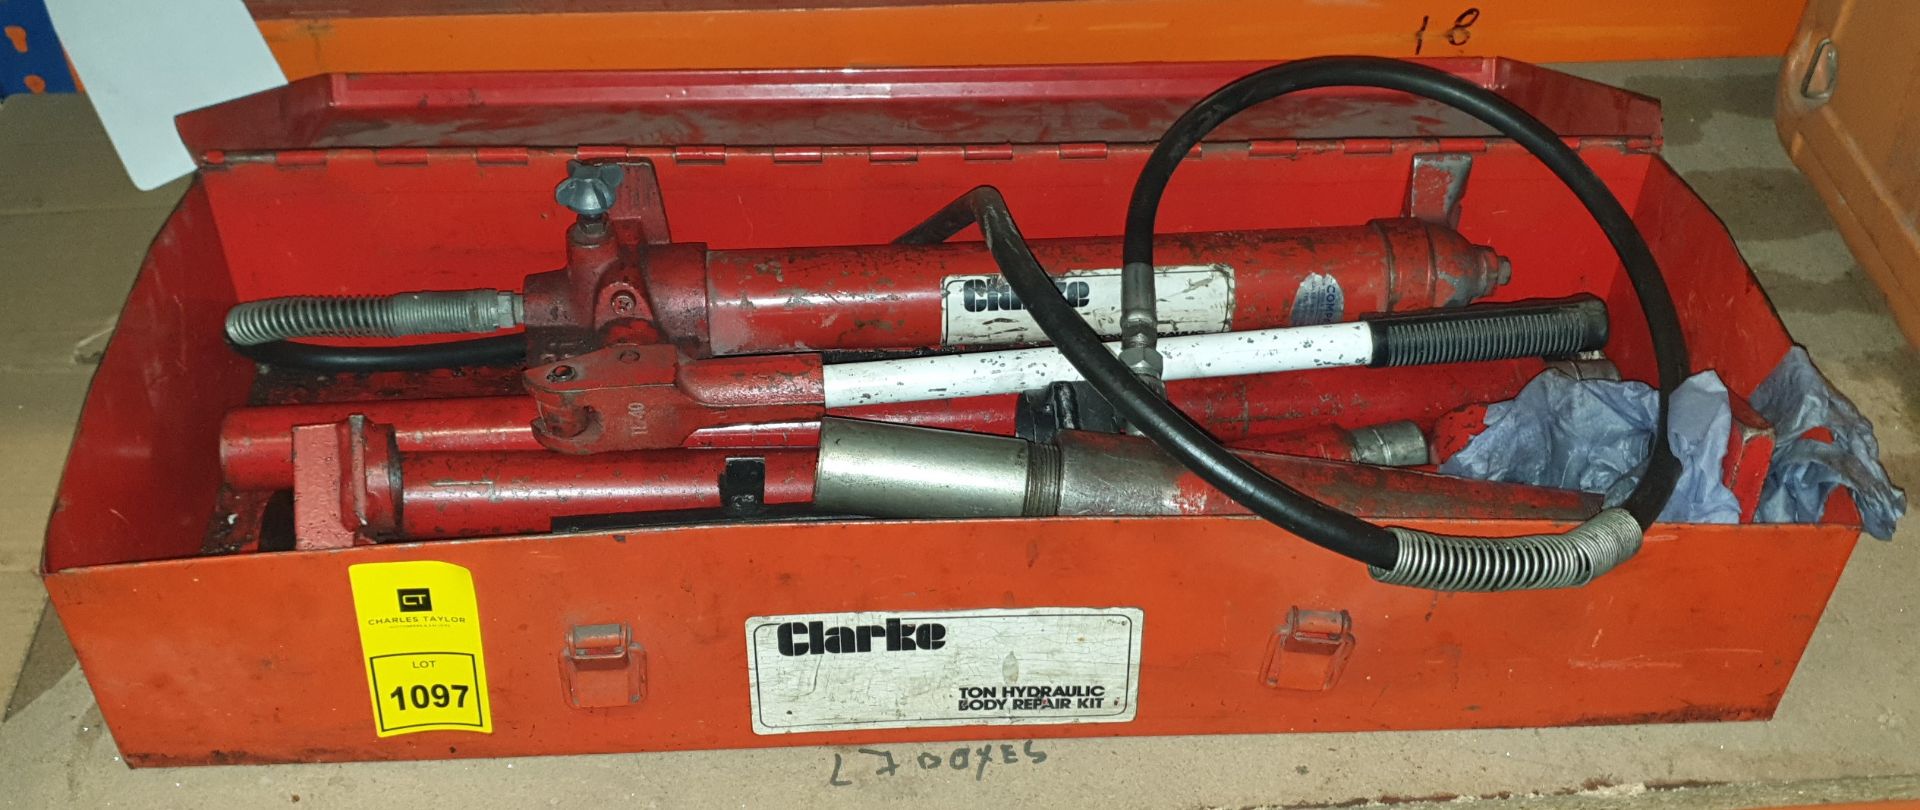 1 X CLARKE HYDRAULIC BODY REPAIR KIT WITH VARIOUS ATTACHMENTS